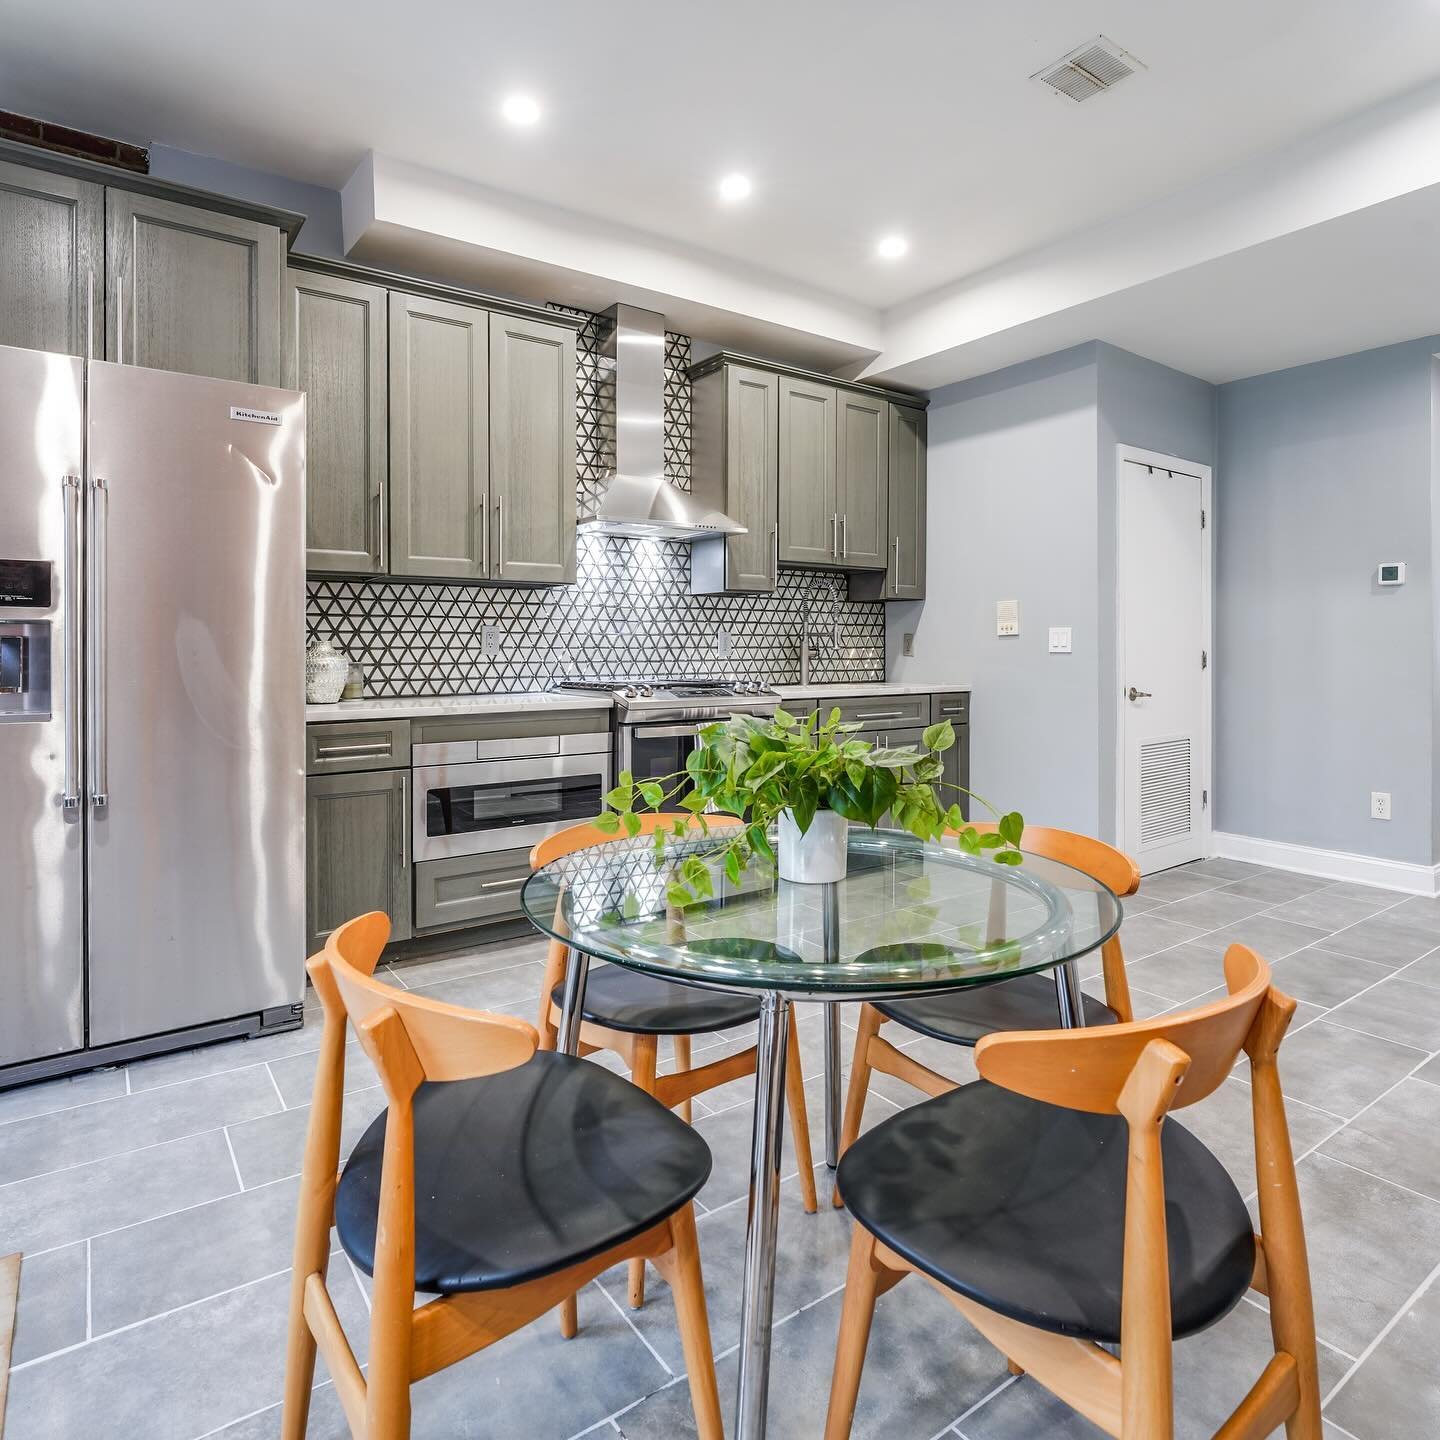 1,000 sq ft 2 bed 1 bath within WALKING distance of&hellip;

Hoboken and Newport Path/Light Rail Stations 🚉🚶&zwj;♂️

Close to business shopping plazas 🛍️ (Acme Supermarket, Target, Best Buy, Home Depot) and Newport Waterfront Park. 

💡Exciting ne